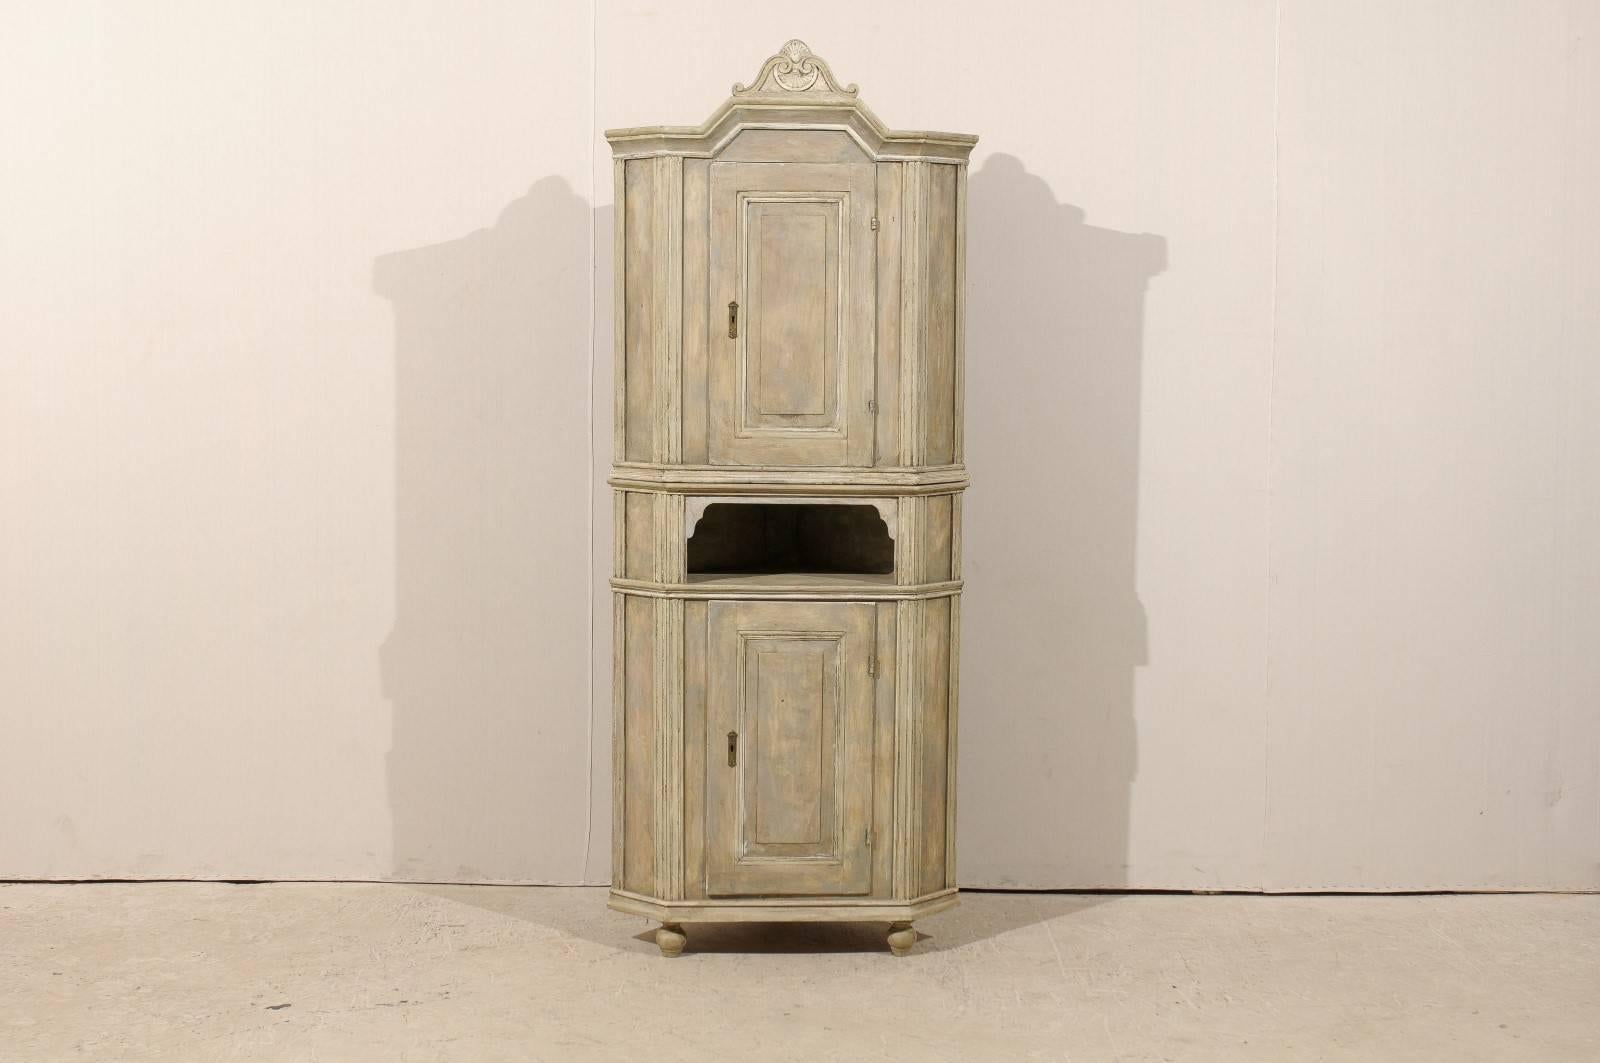 An early 19th century Swedish corner cabinet. This Swedish two-door cabinet, circa 1830, has a carved bonnet with shell and scroll motif on a carved pediment. This corner cabinet features a door at the top over an open shelf area and another door in